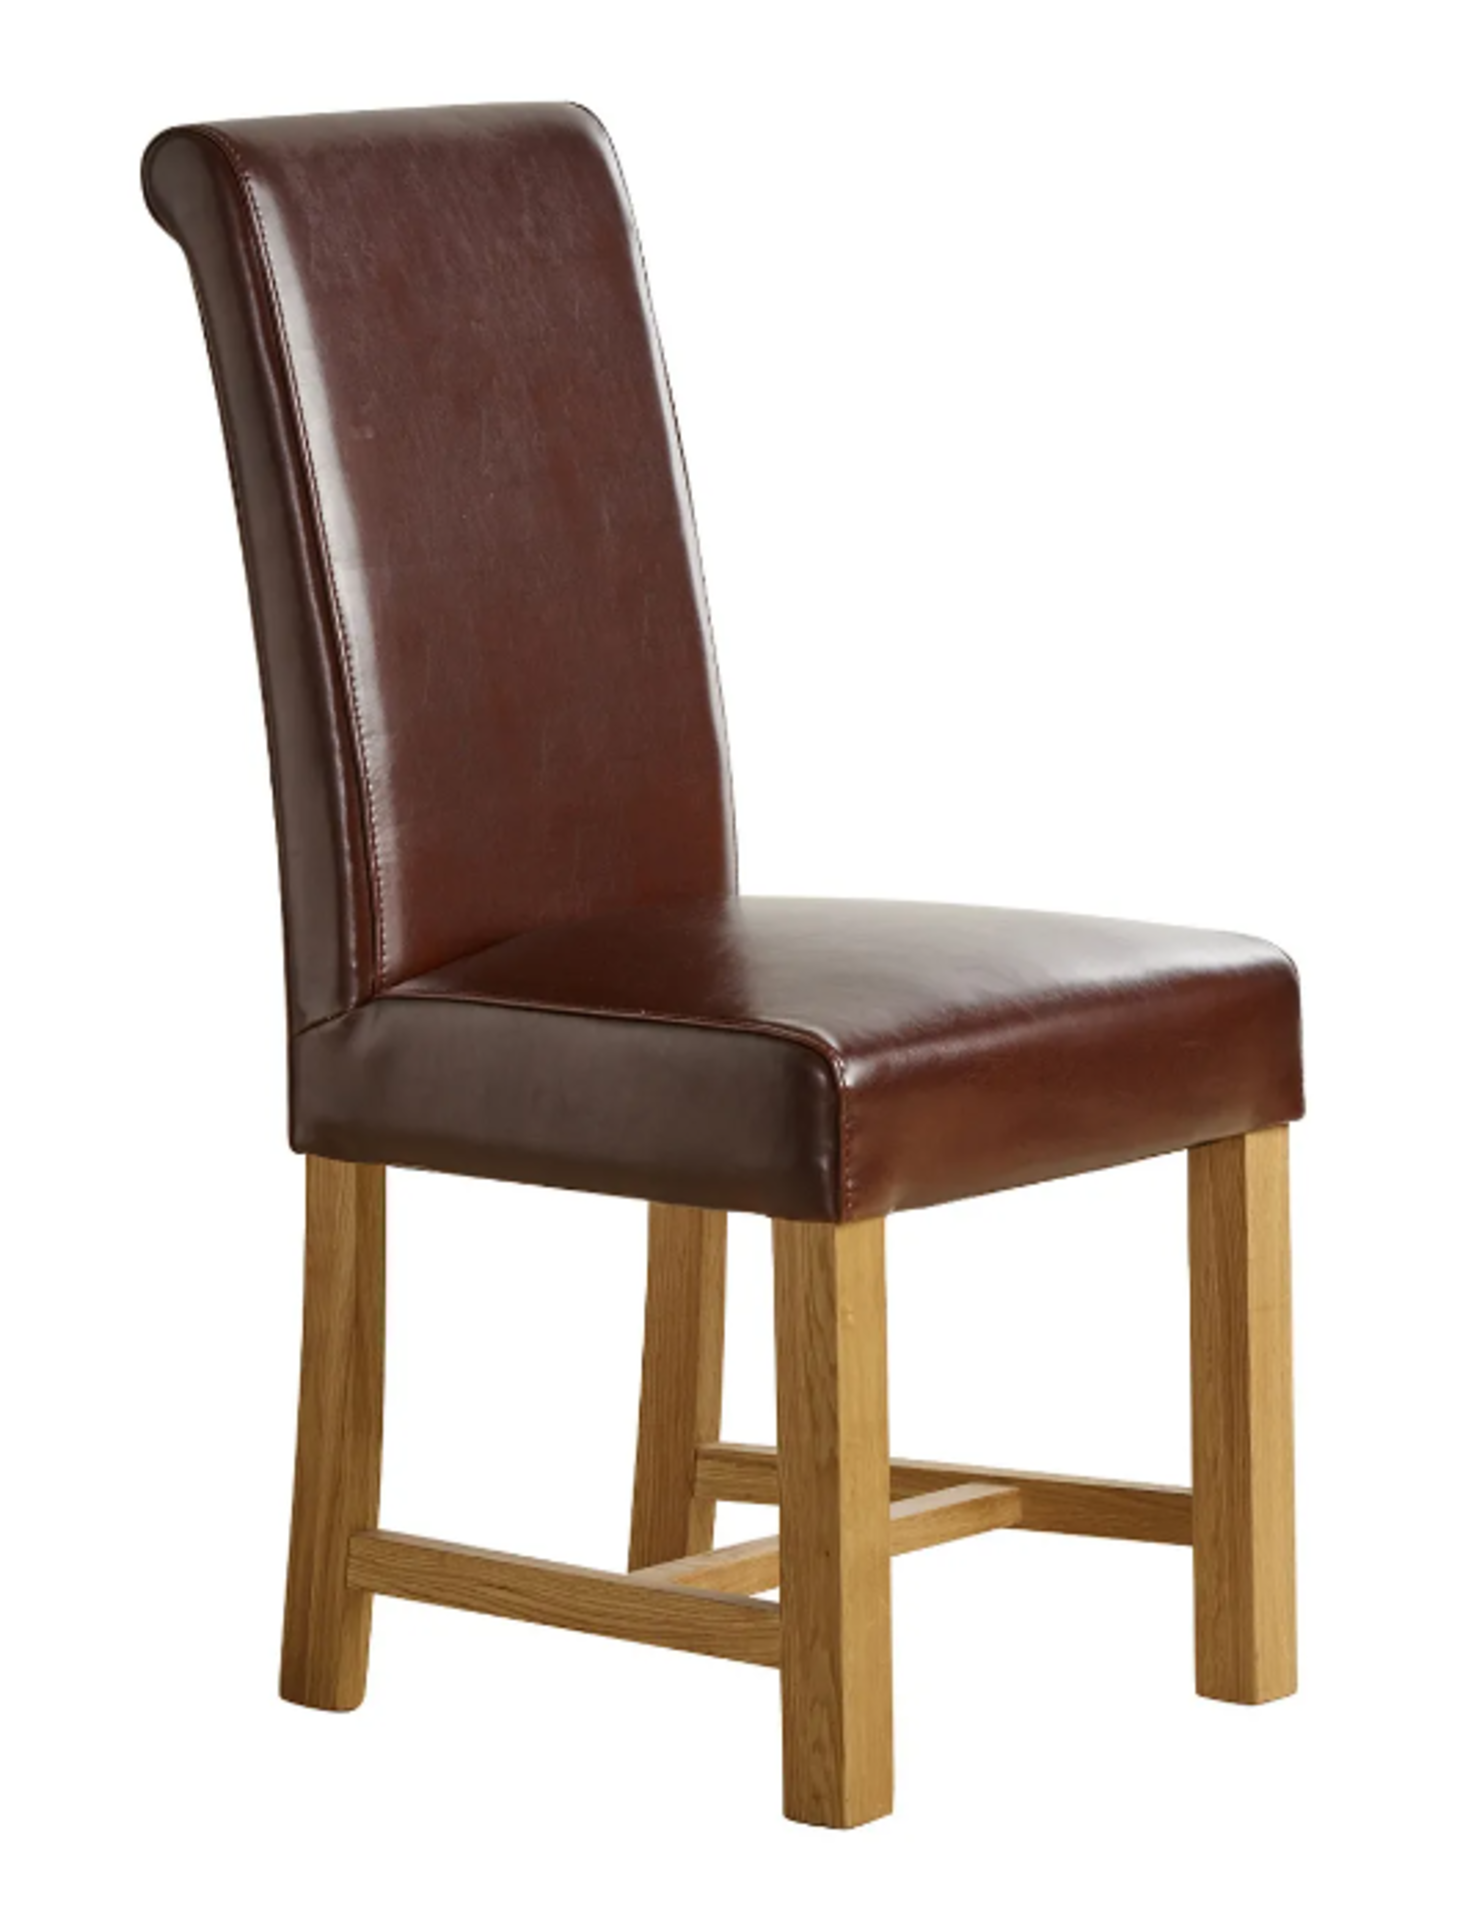 Pair of SCROLL BACK NATURAL/RUSTIC Plain Brown Leather Dining Chair. RRP £195.00. Influenced by